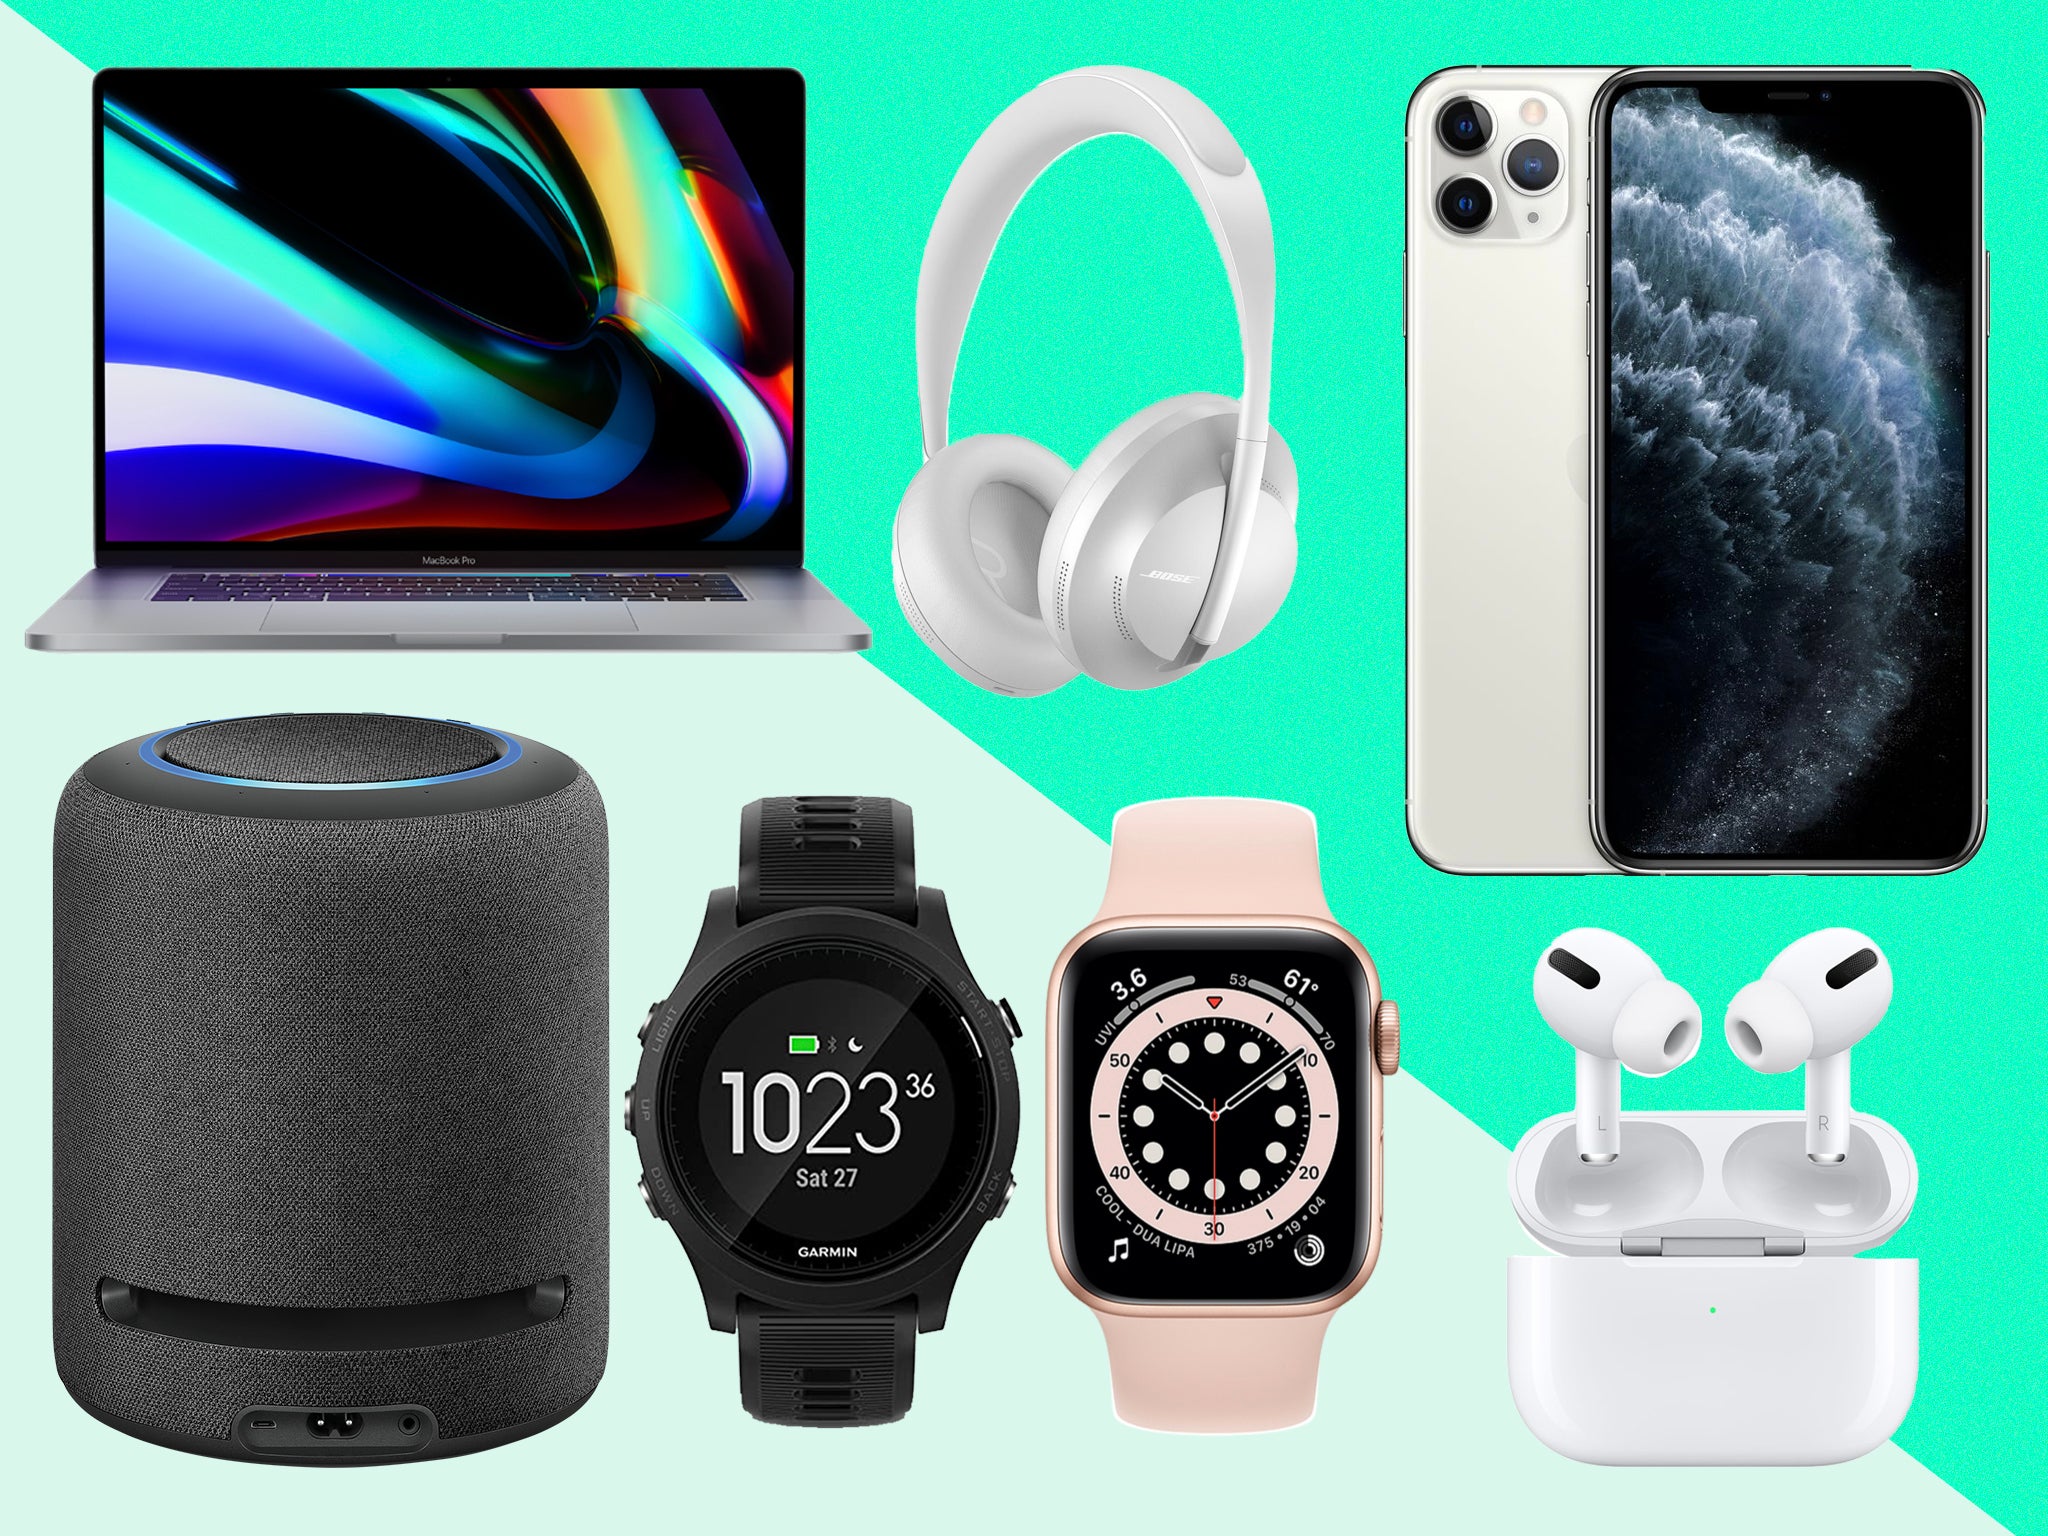 Looking for the latest device? Allow our round-up to help&nbsp;